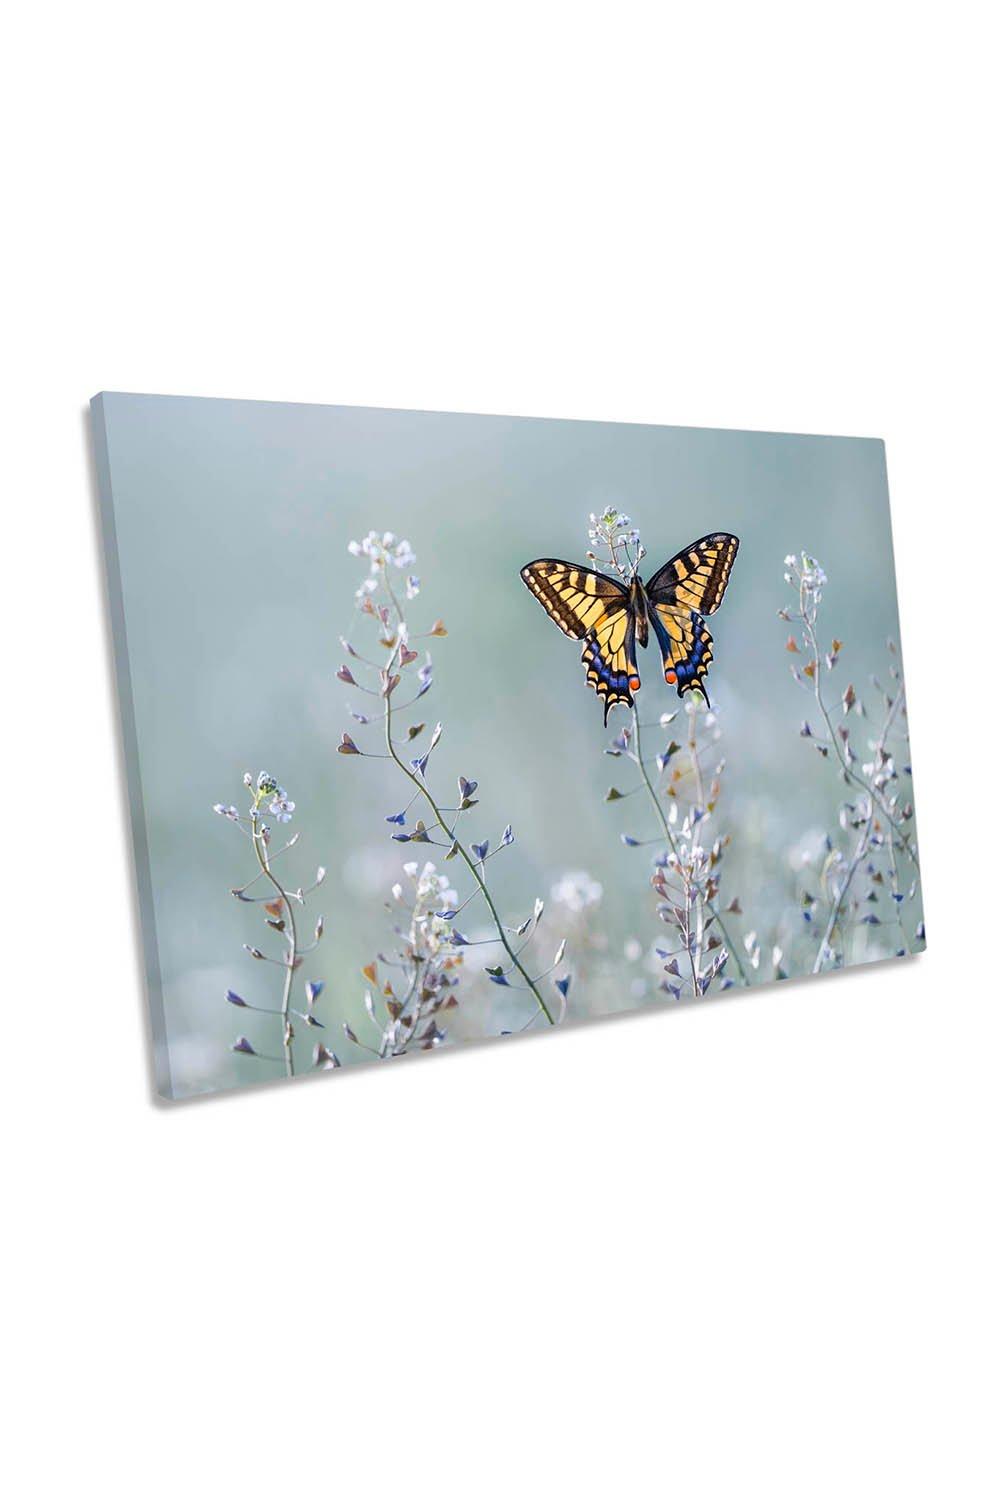 Swallowtail Beauty Butterfly Floral Canvas Wall Art Picture Print